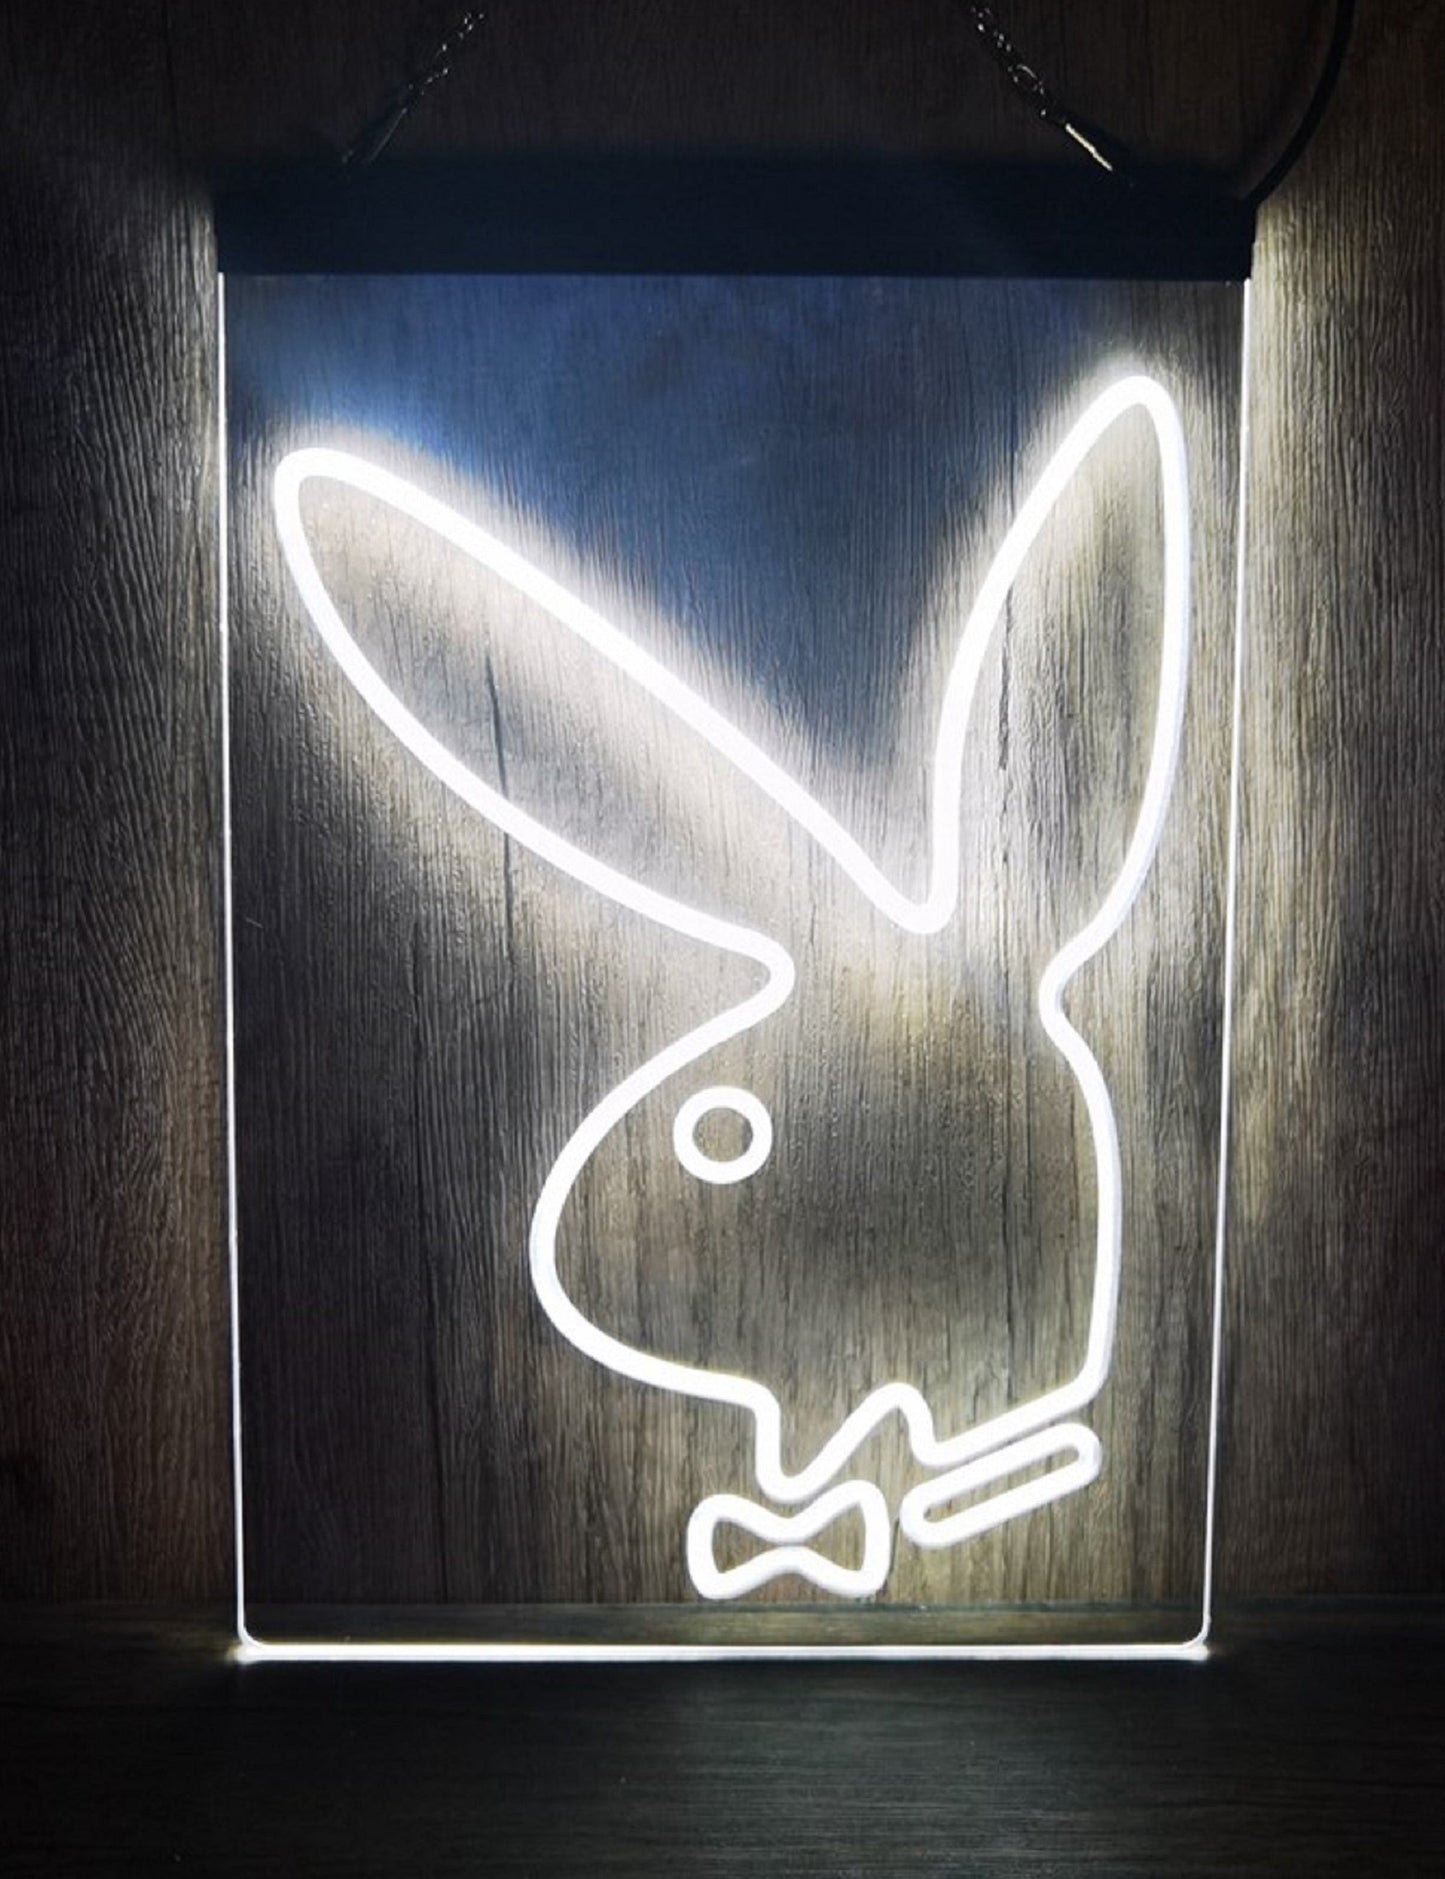 Neon Sign Rabbit Wall Hanging Desk Table Top Decor